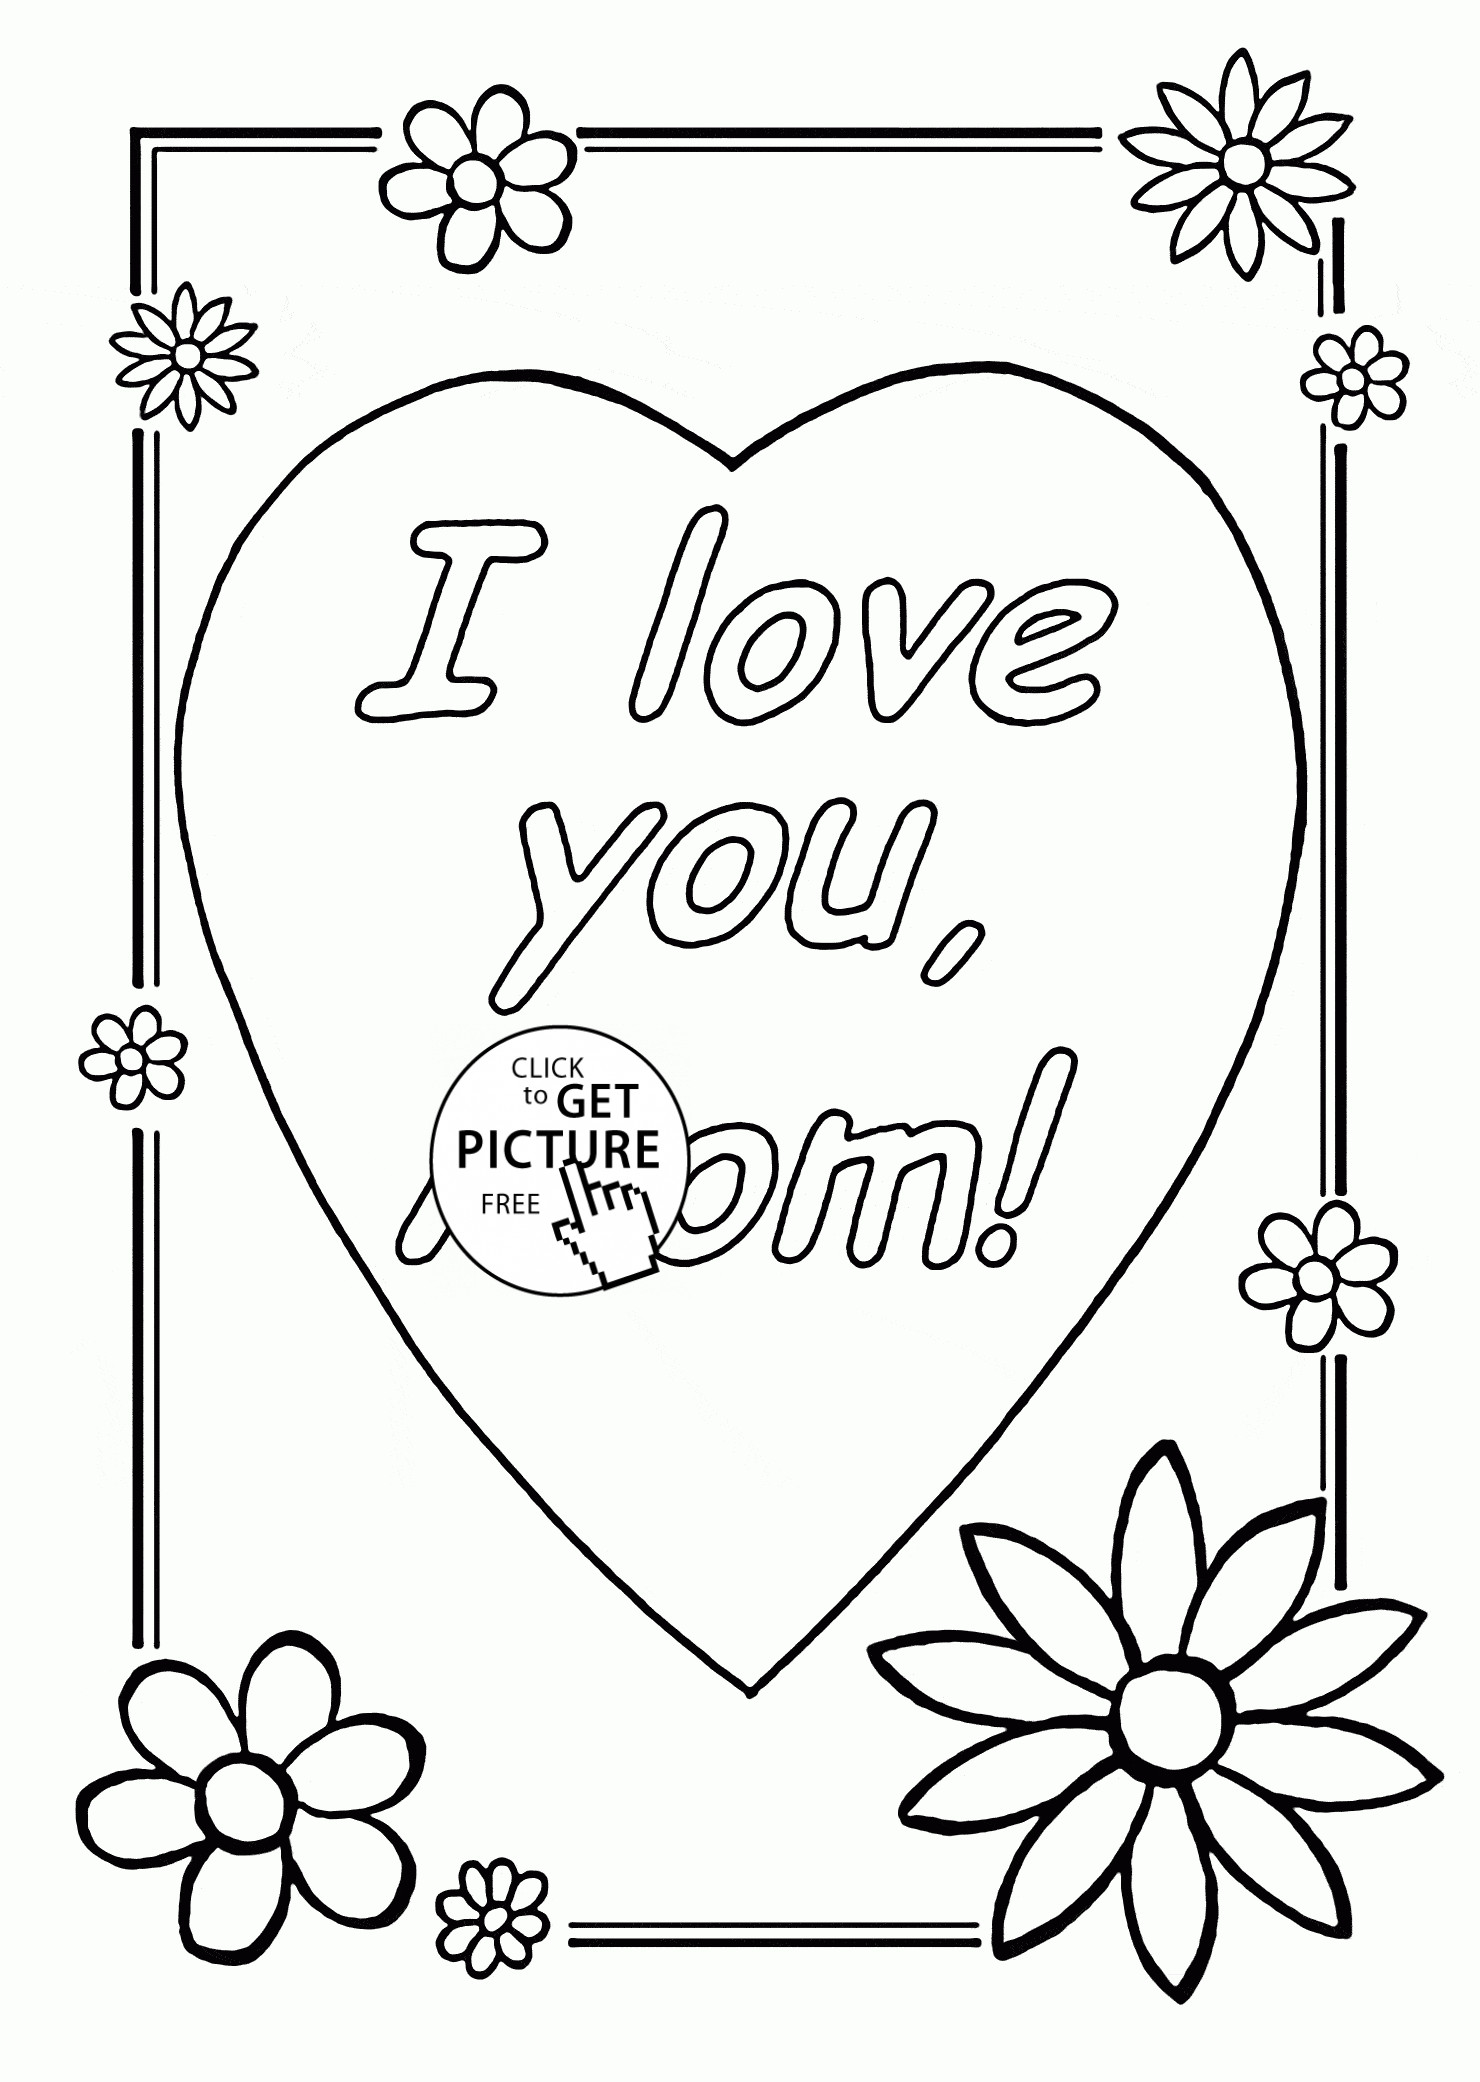 Coloring Pages For Girls I Love You Mom
 I Love You Mom Mother s Day coloring page for kids